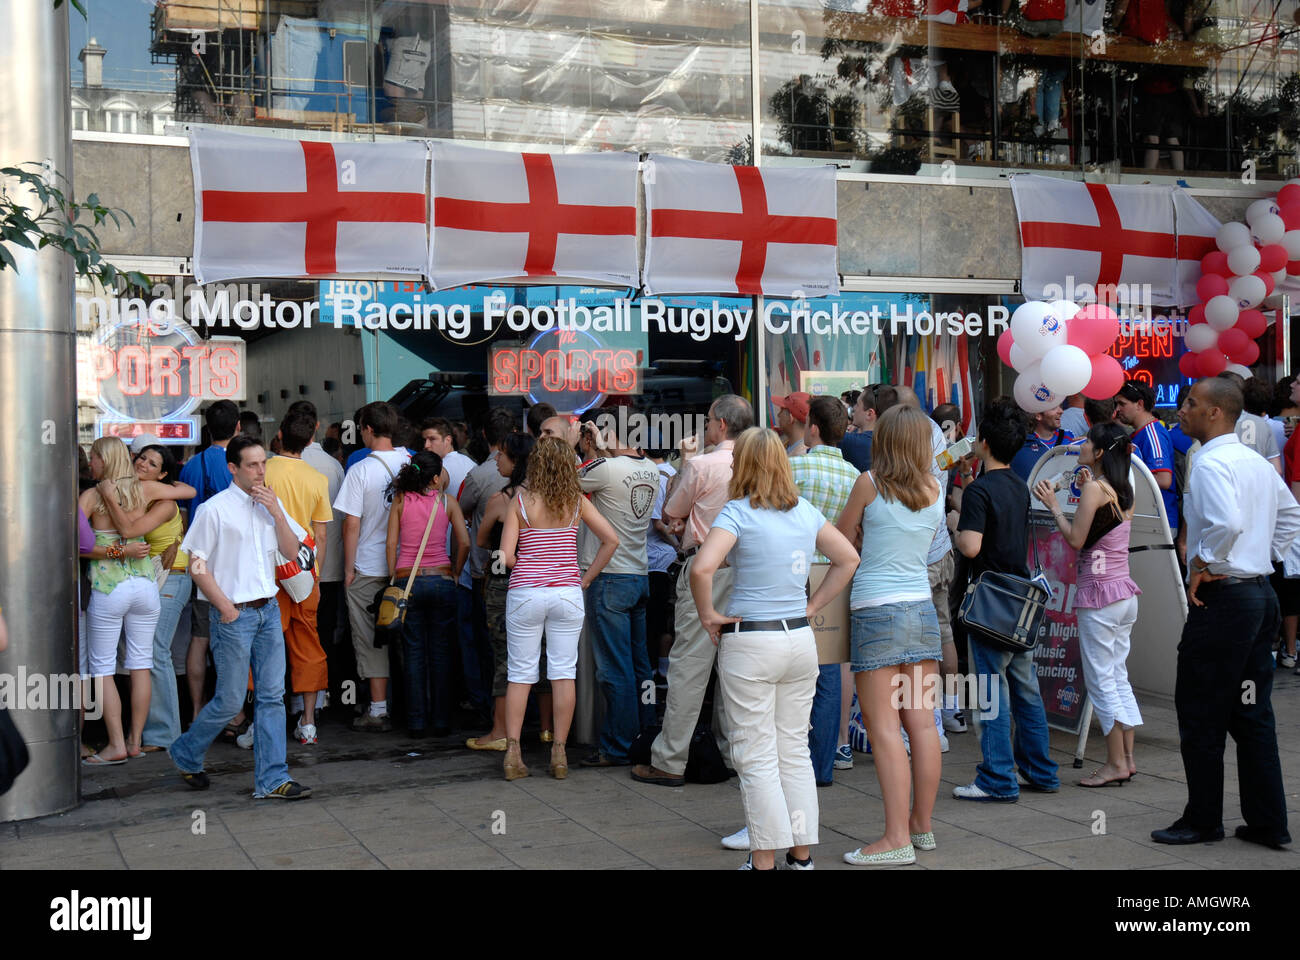 People watching a 2006 World Cup football match outside The Sports Café in Haymarket London Stock Photo